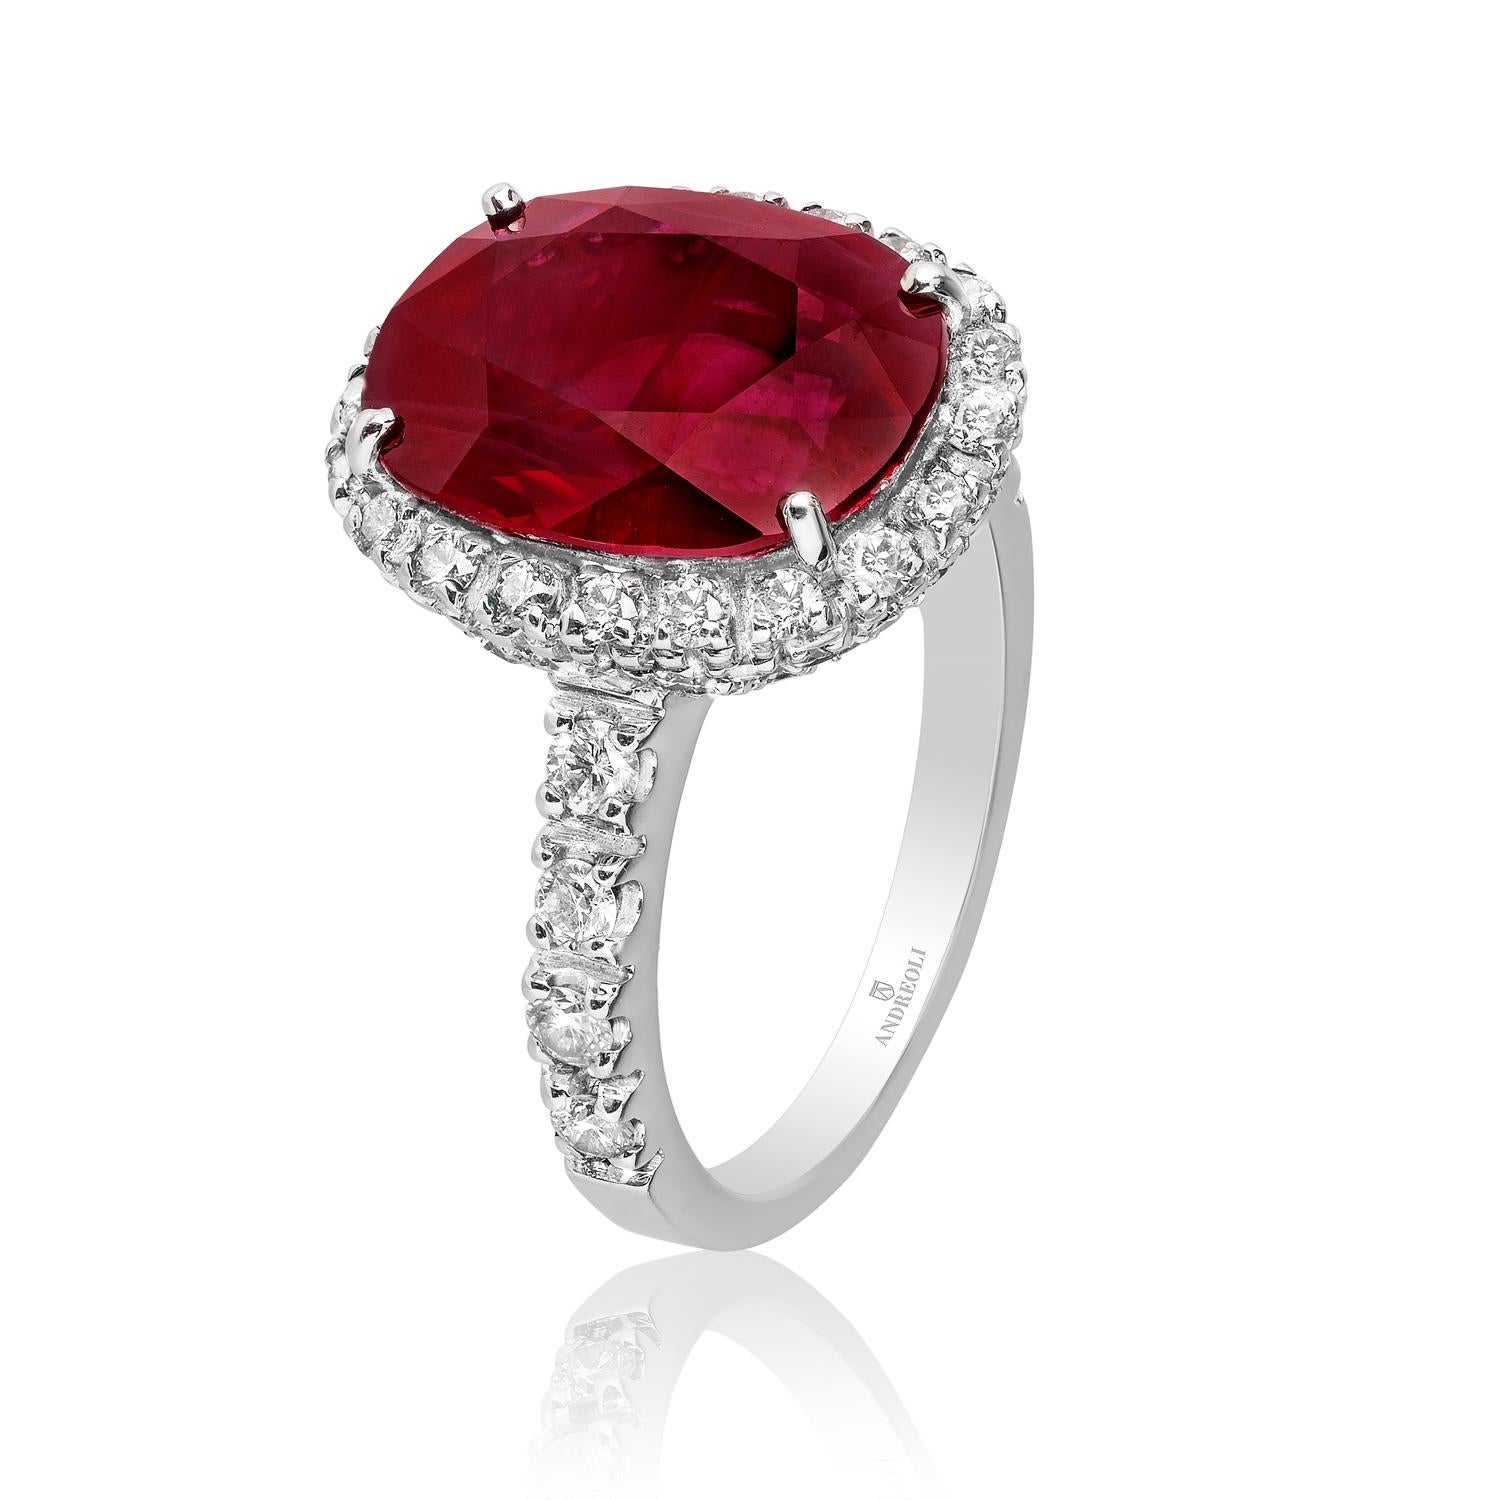 Contemporary Andreoli 8.28 Carat Burma Certified Ruby Diamond 18 Karat White Gold Ring For Sale